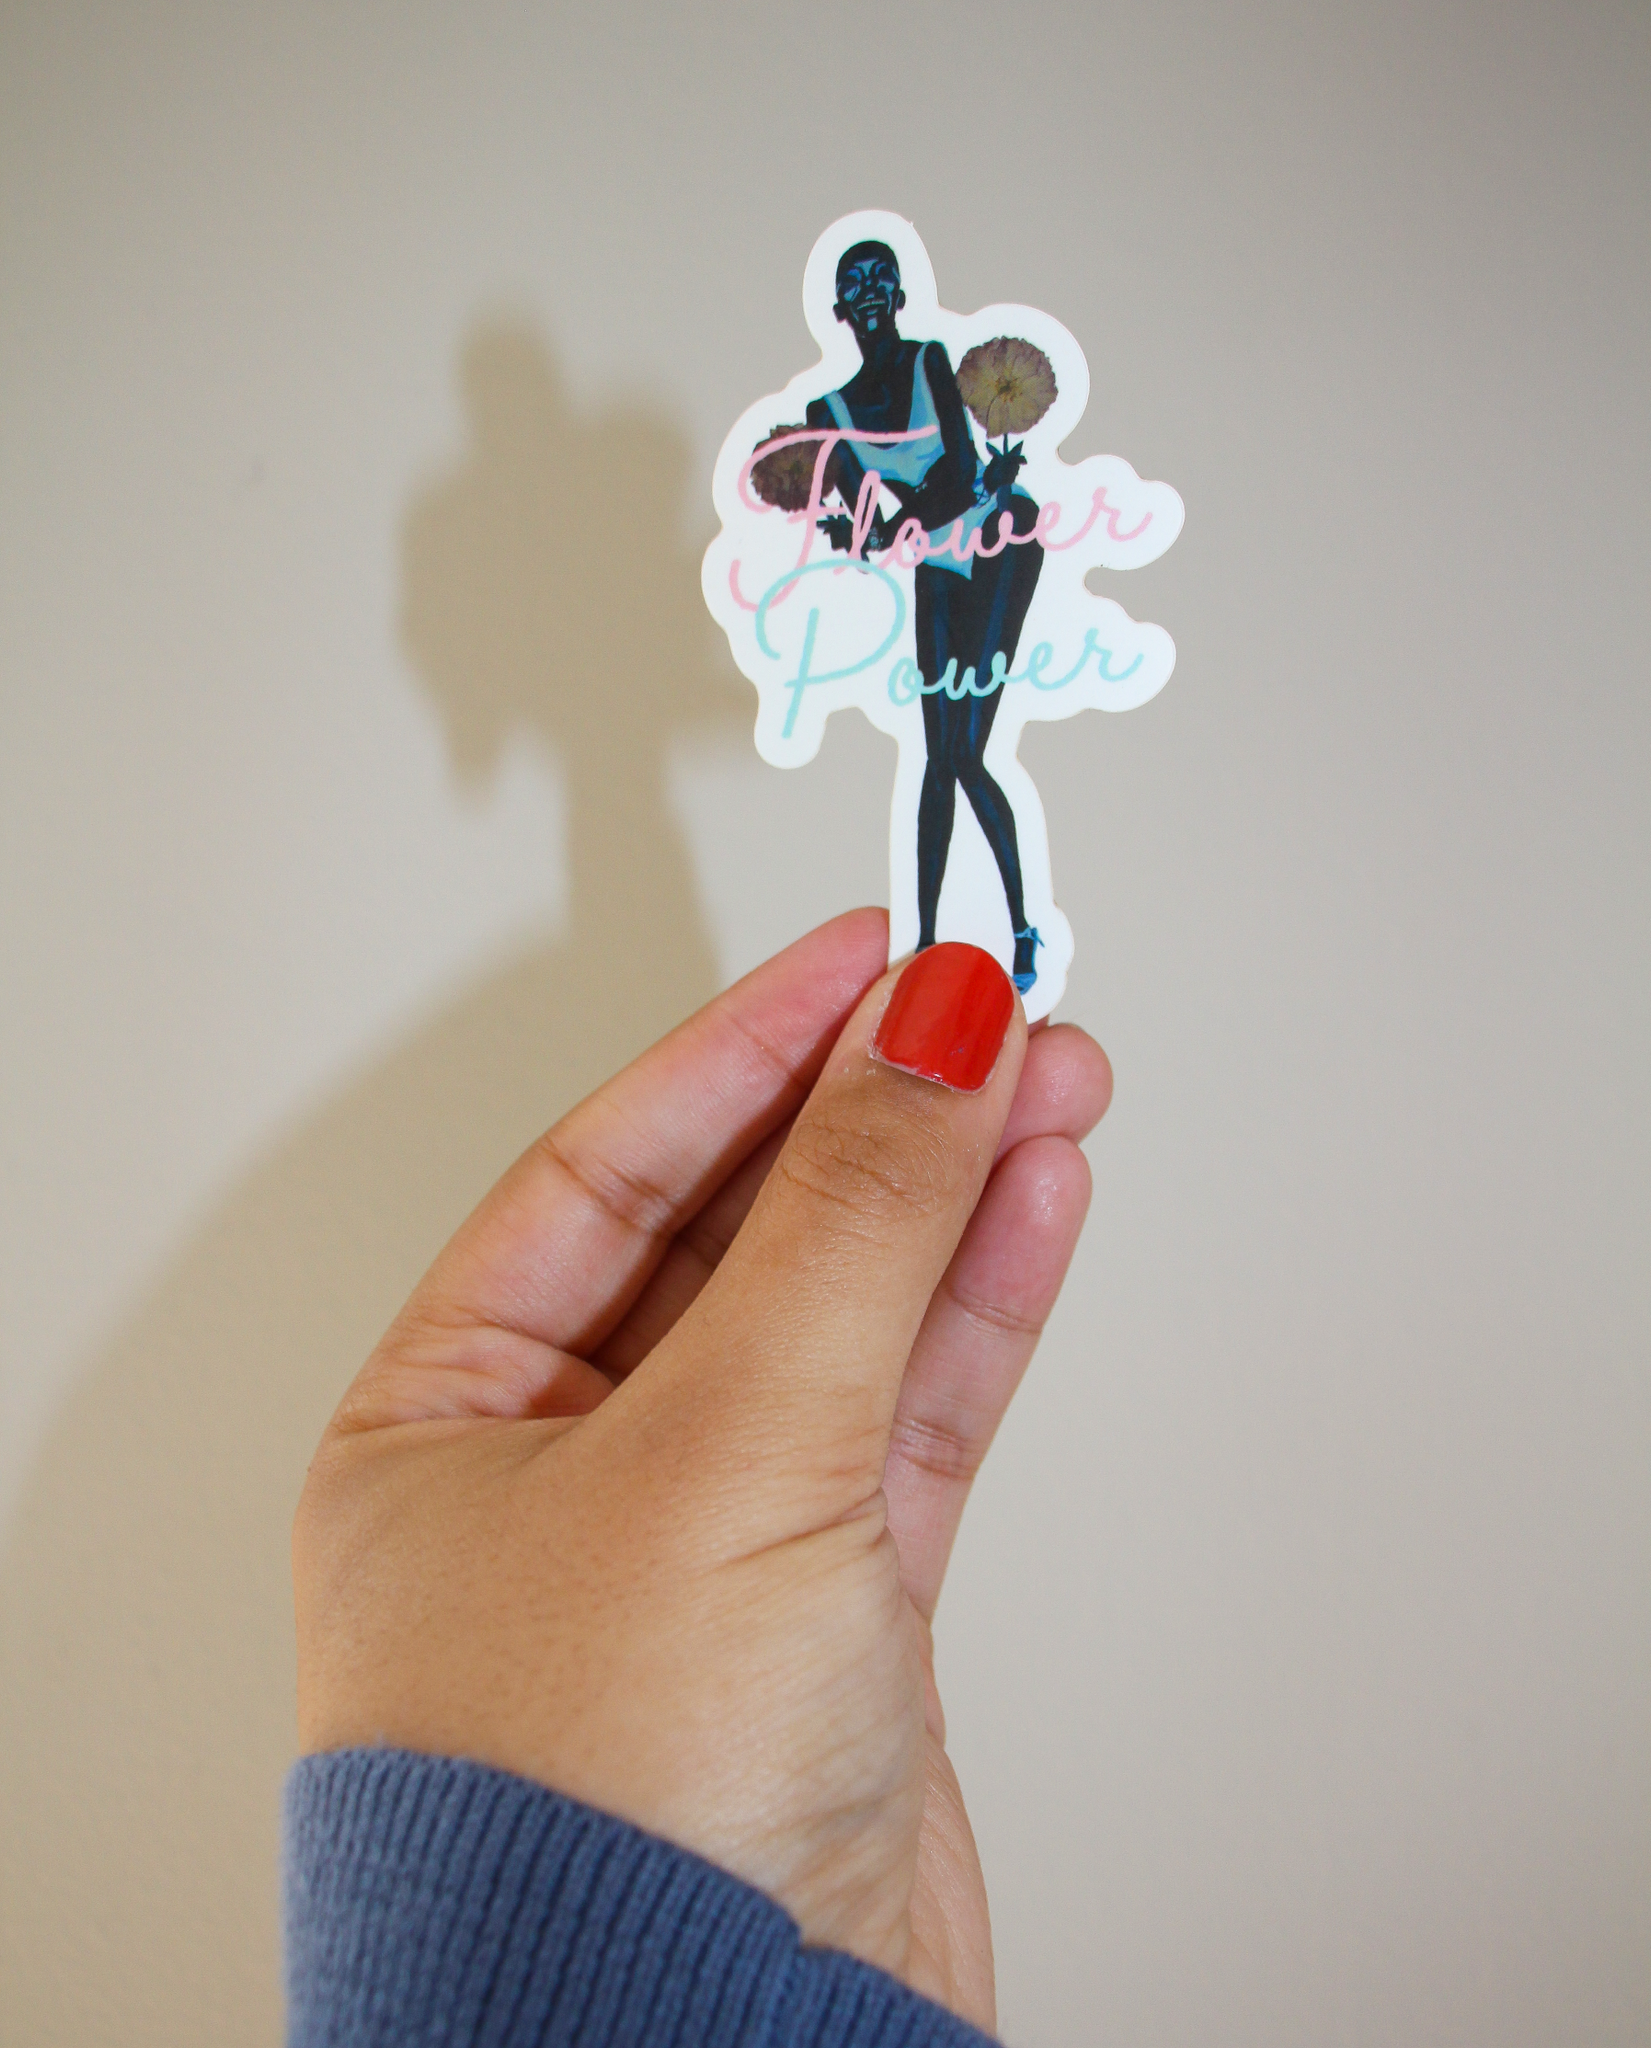 A hand holding a sticker of an image of model Adut Akech holding pressed flowers, with the words "Flower Power" in front